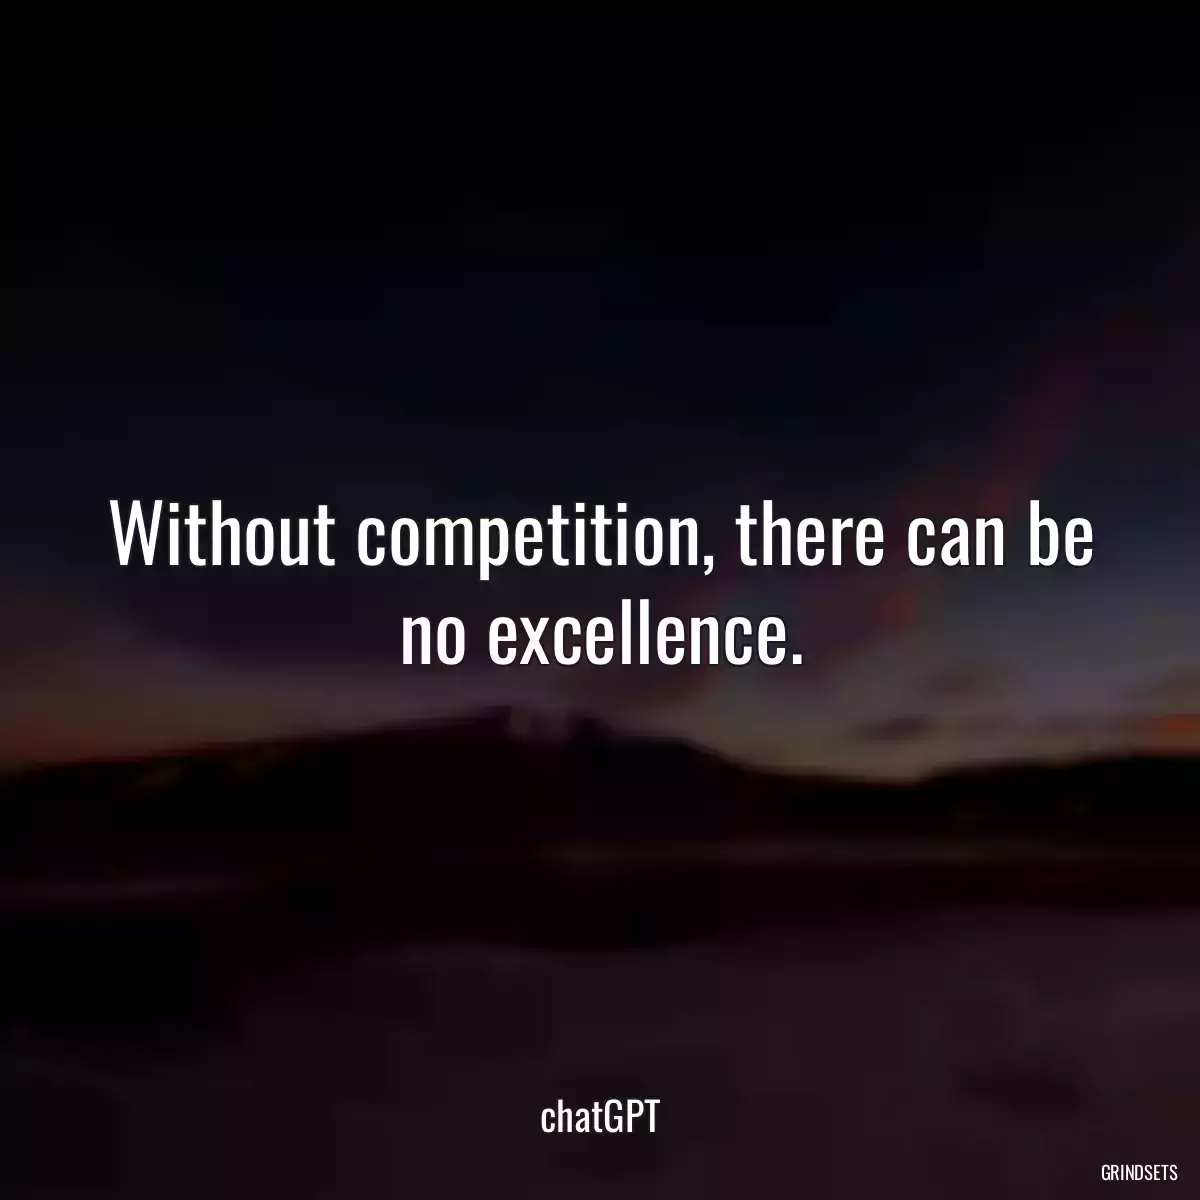 Without competition, there can be no excellence.